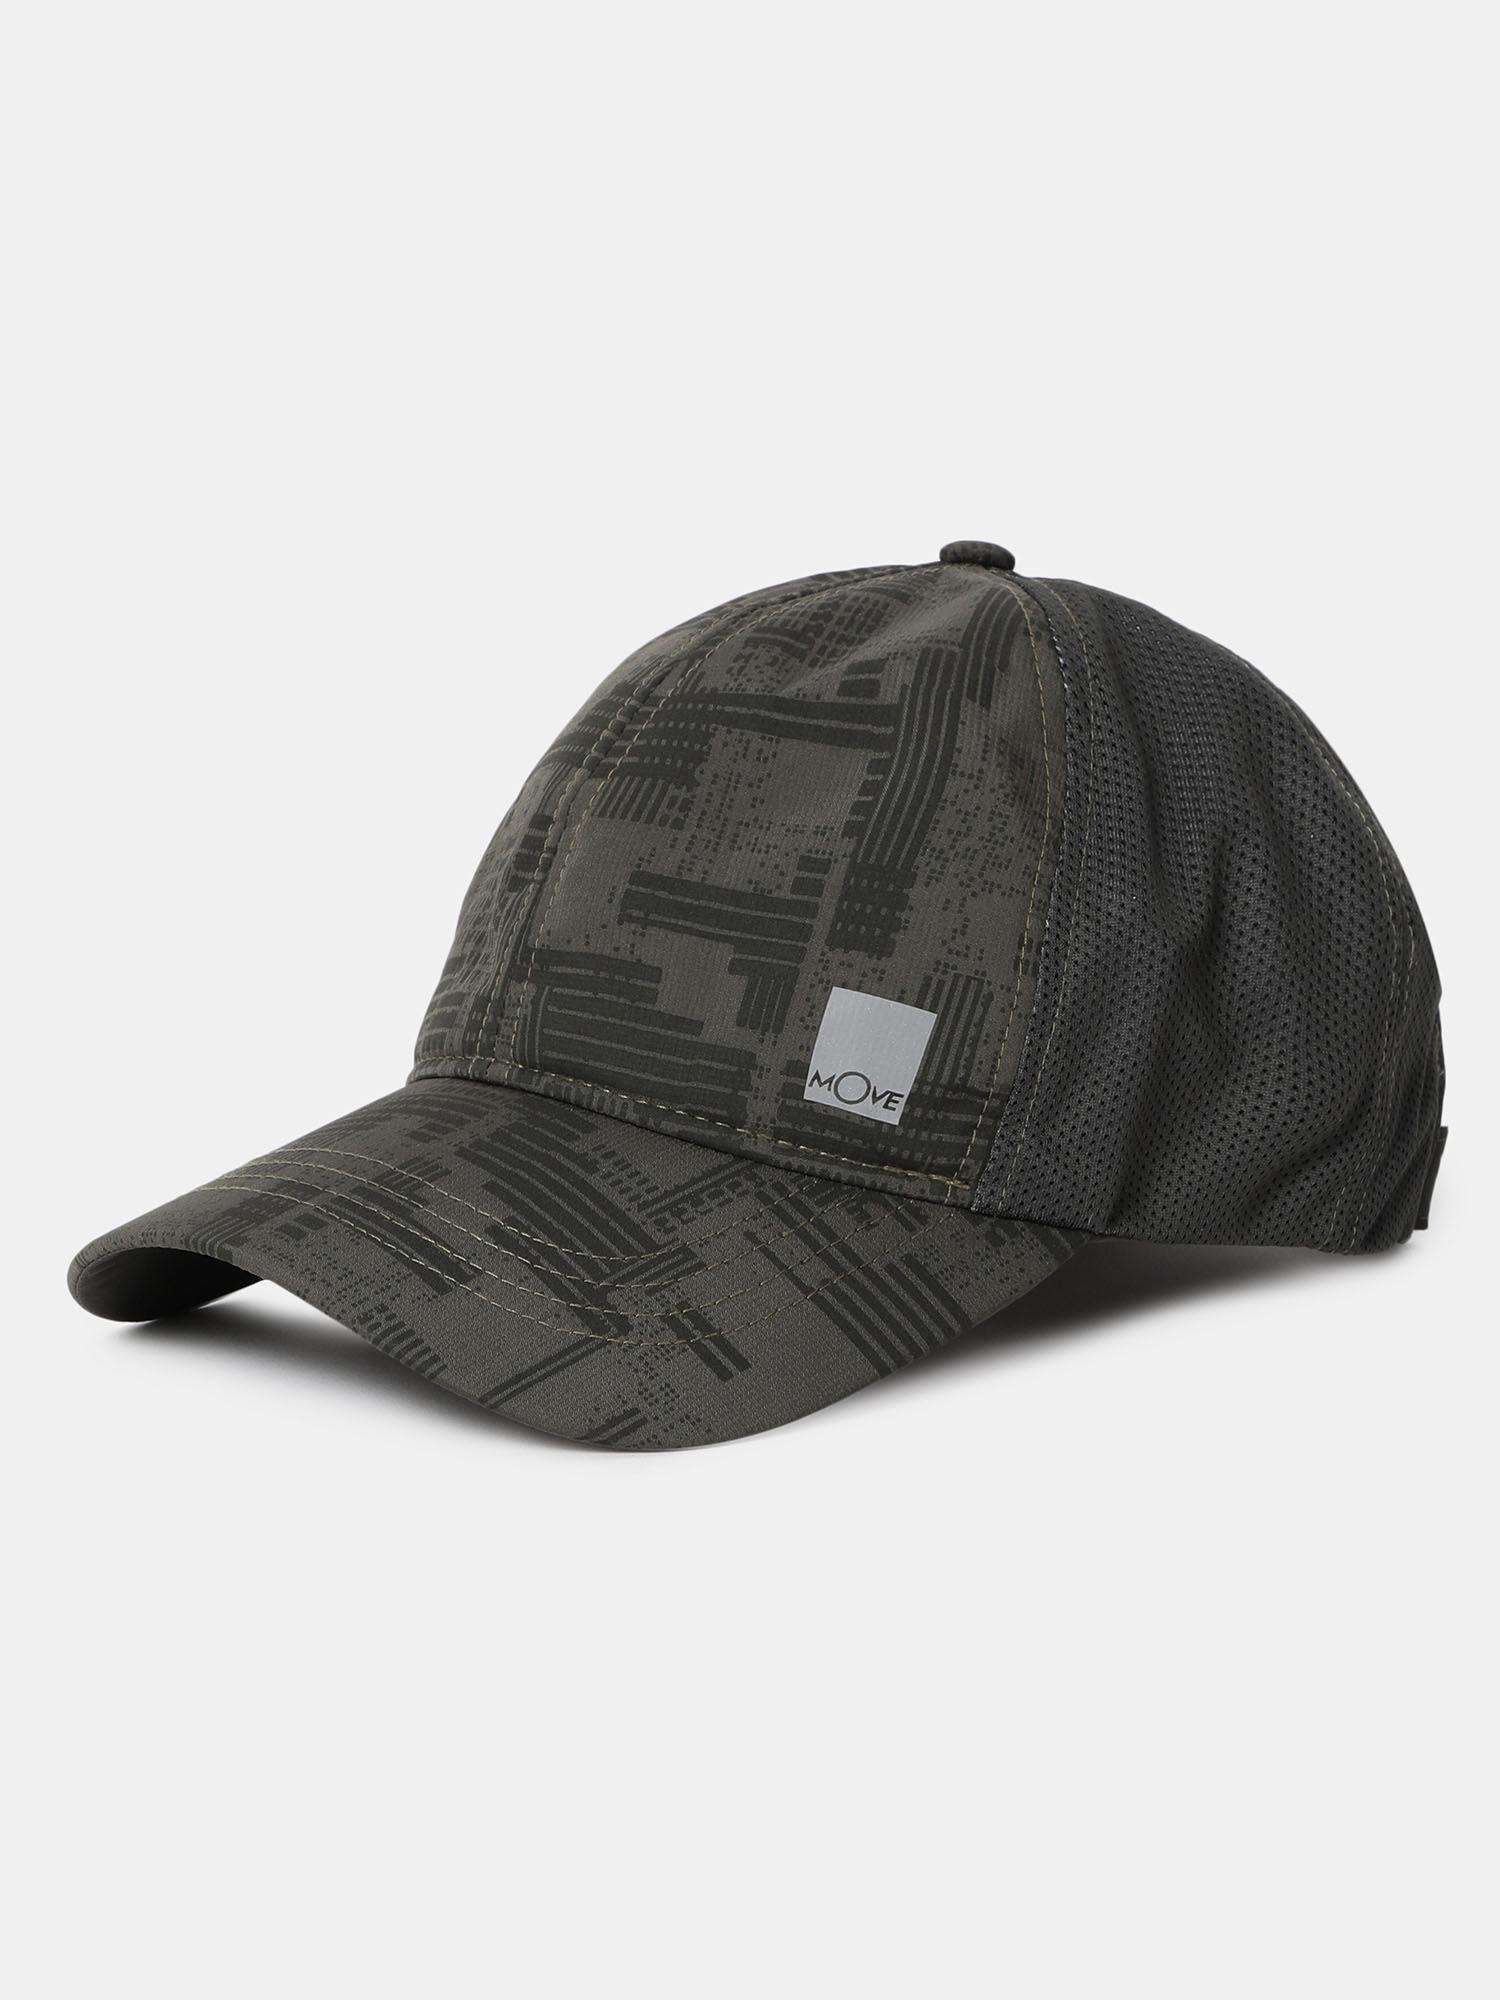 cp23 polyester printed cap with adjustable back closure and stay dry deep charcoal